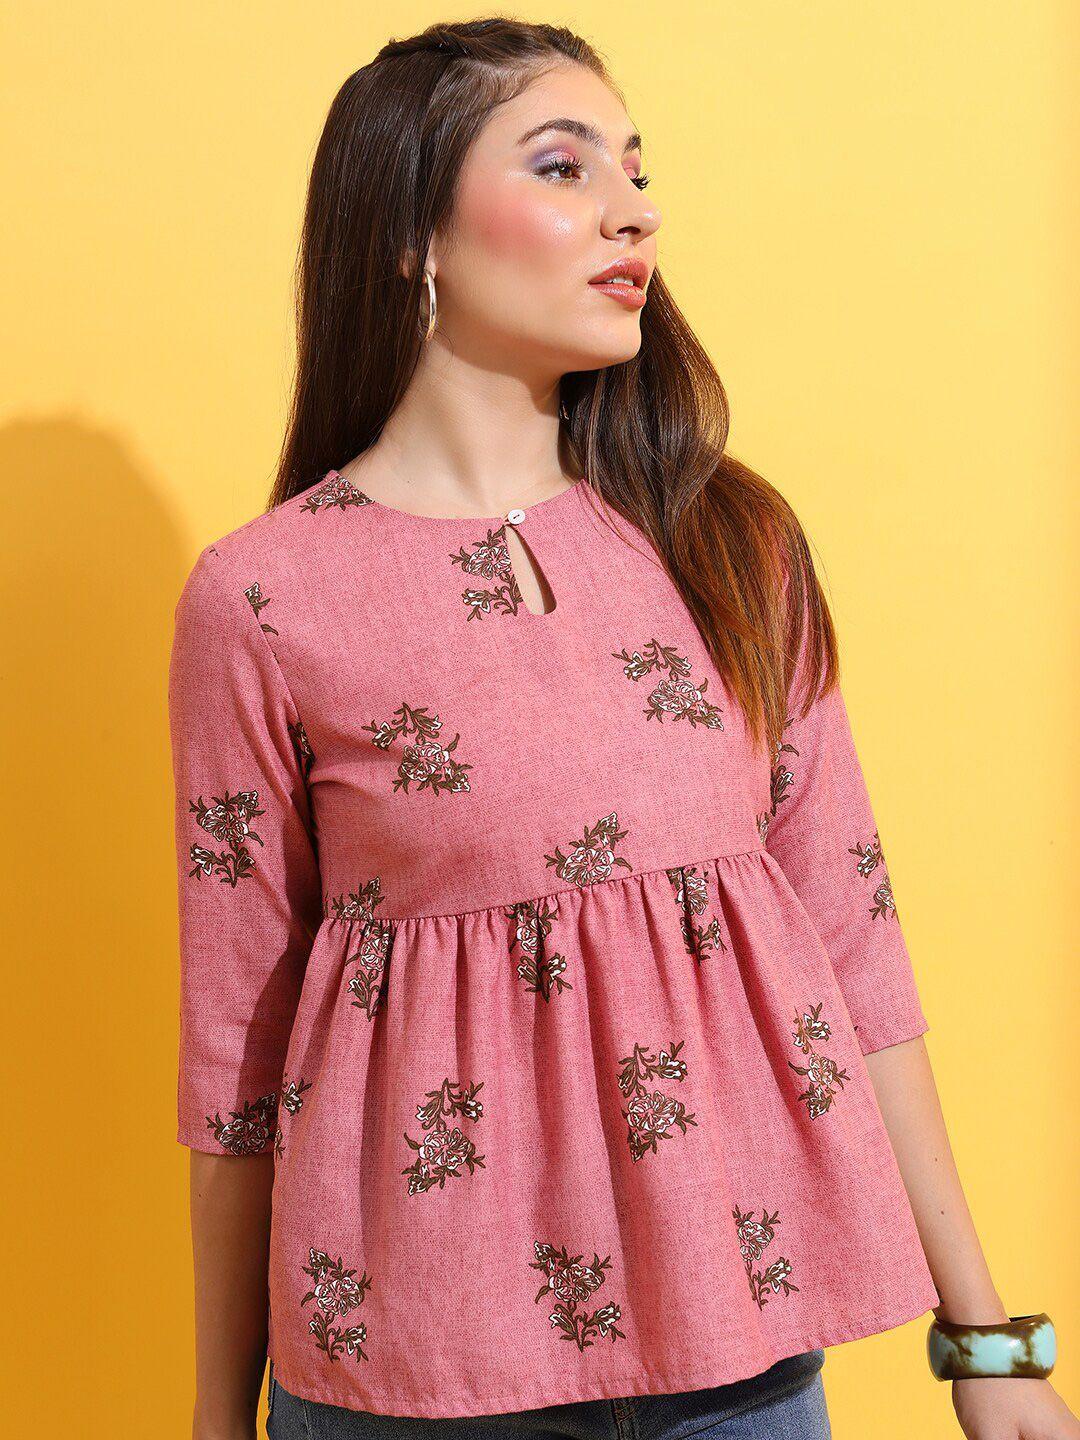 ketch-pink-floral-print-key-hole-neck-empire-top